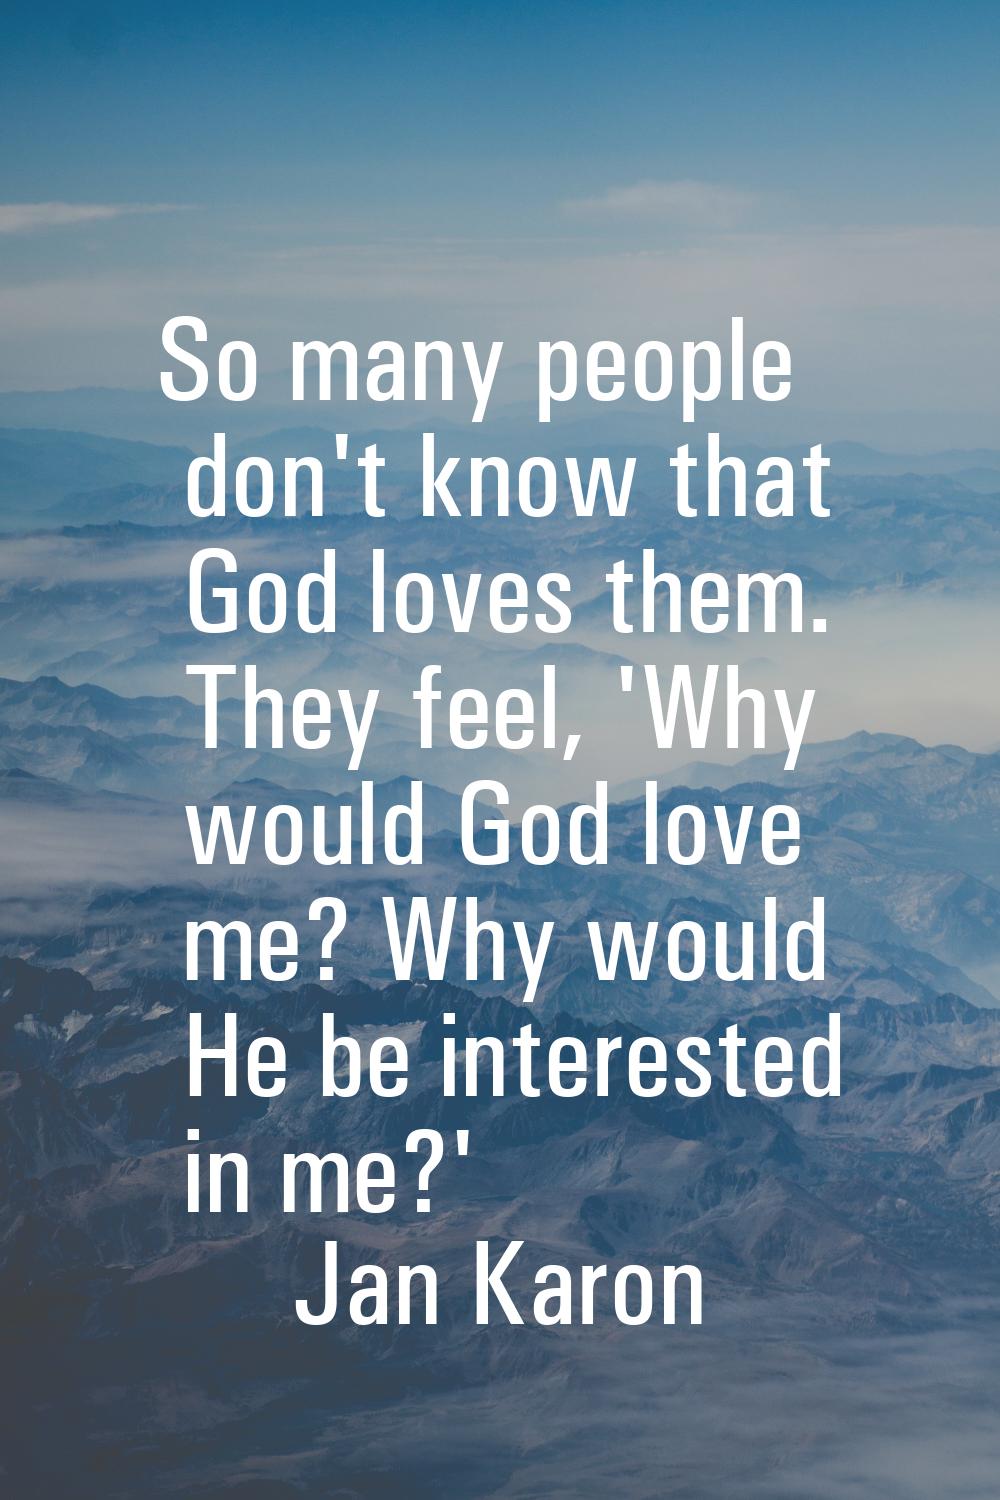 So many people don't know that God loves them. They feel, 'Why would God love me? Why would He be i